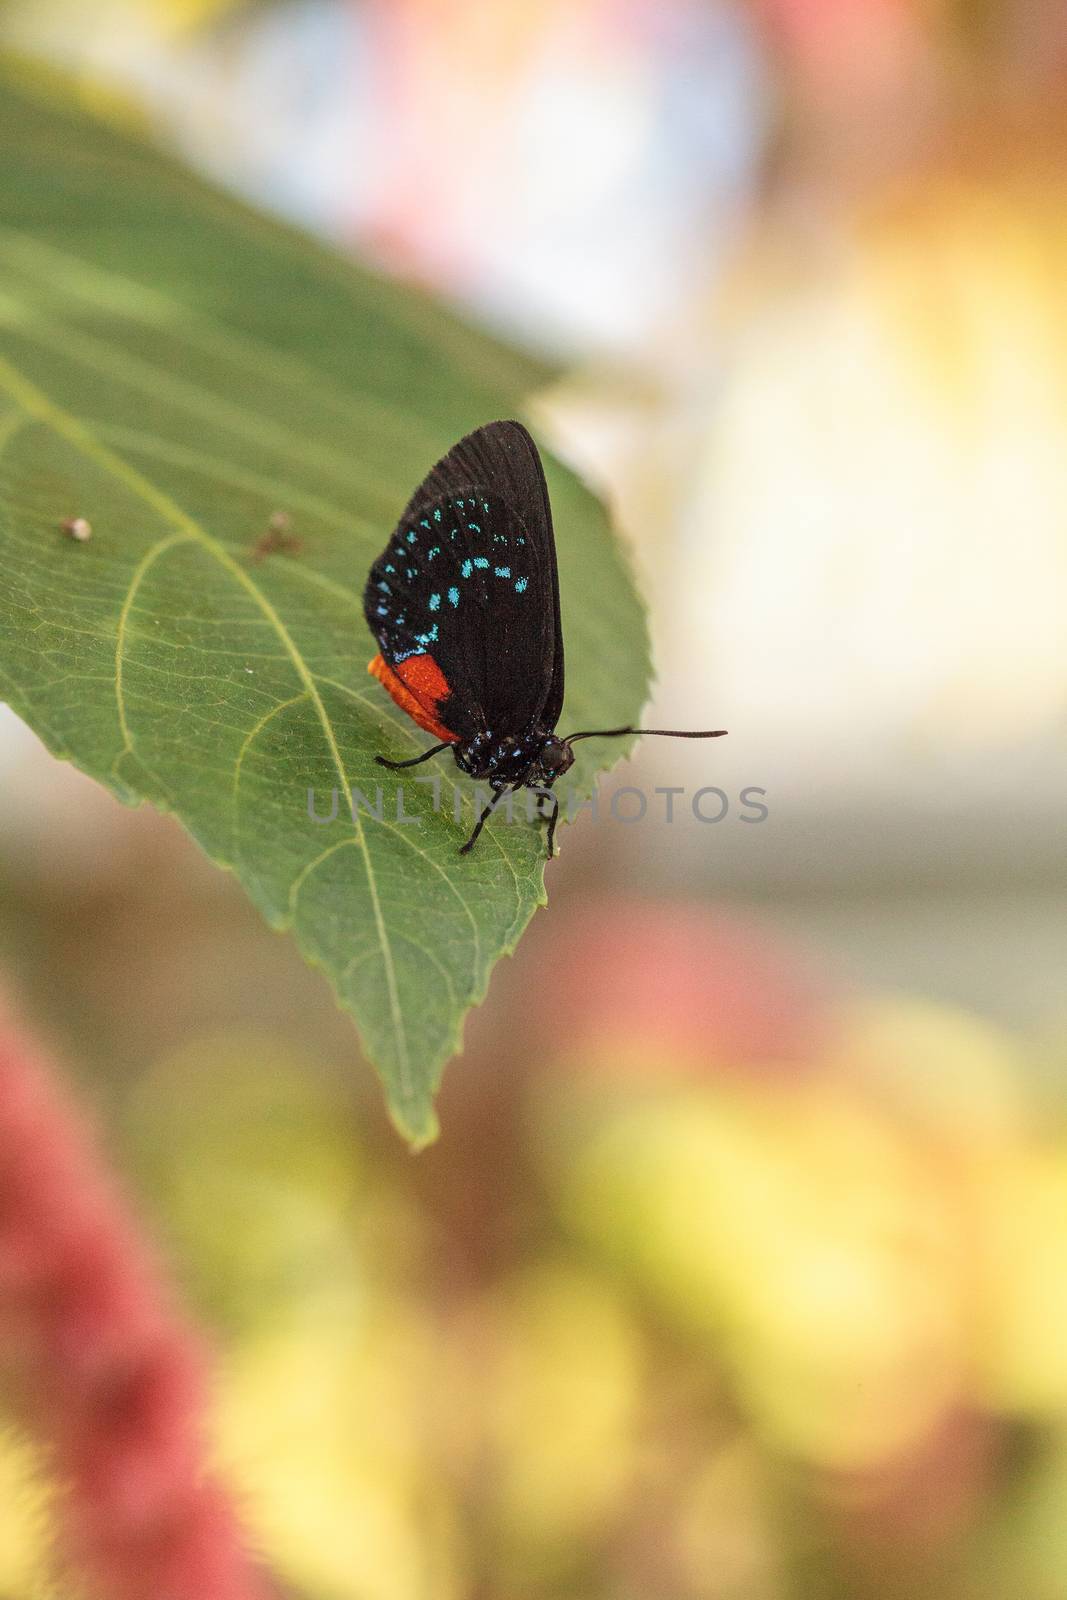 Black and orange red Atala butterfly called Eumaeus atala perche by steffstarr